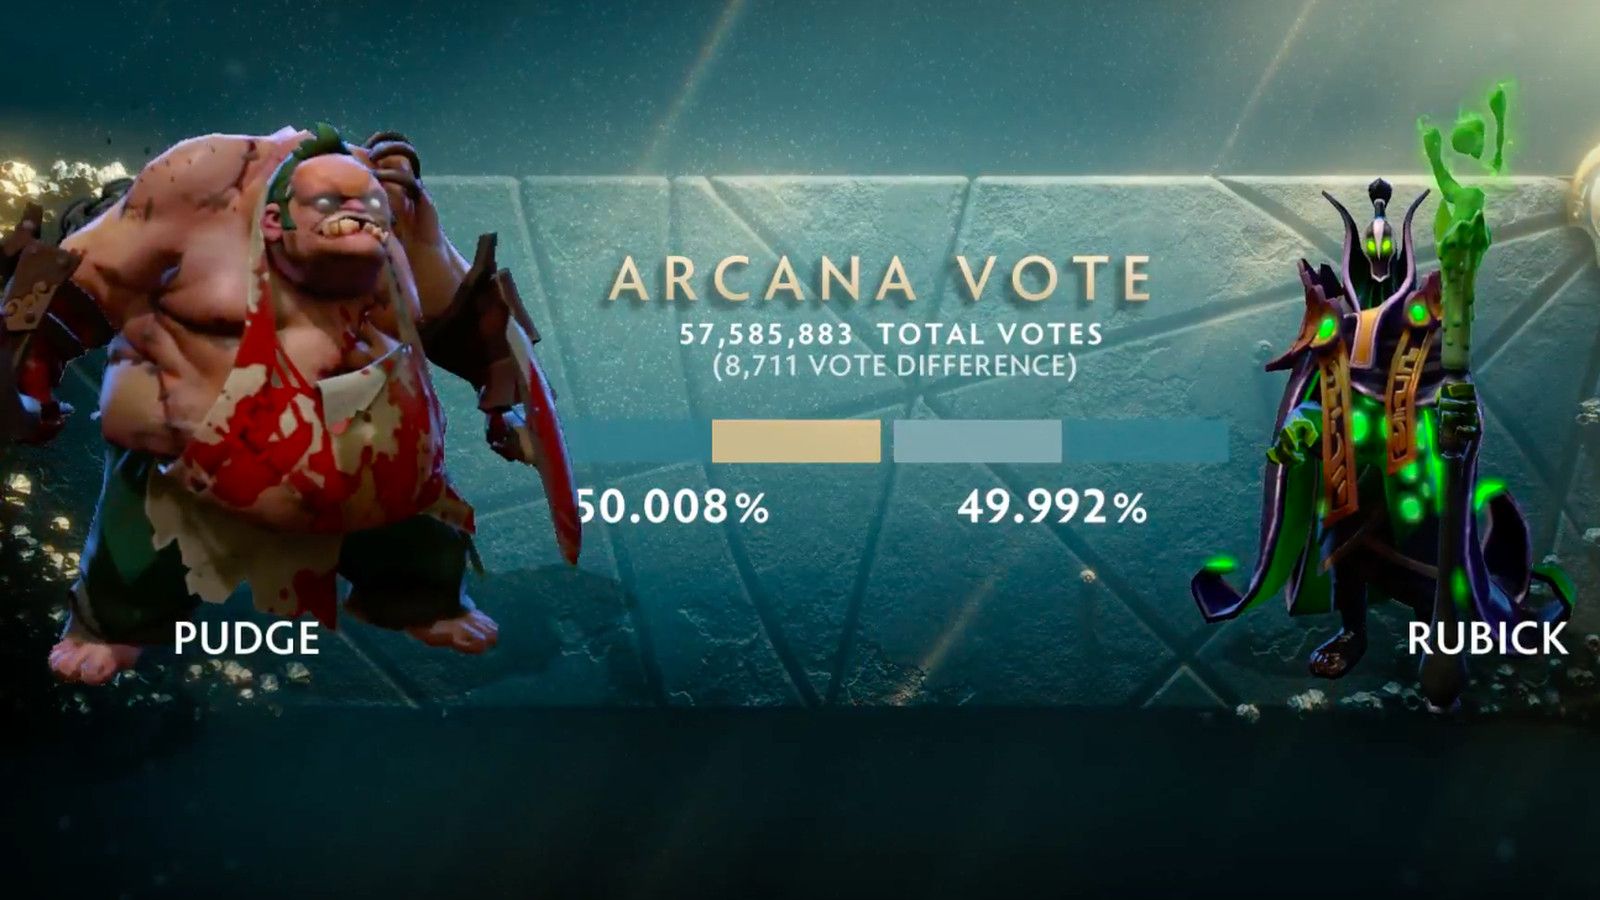 Pudge beats Rubick in Arcana vote by mere thousands Flying